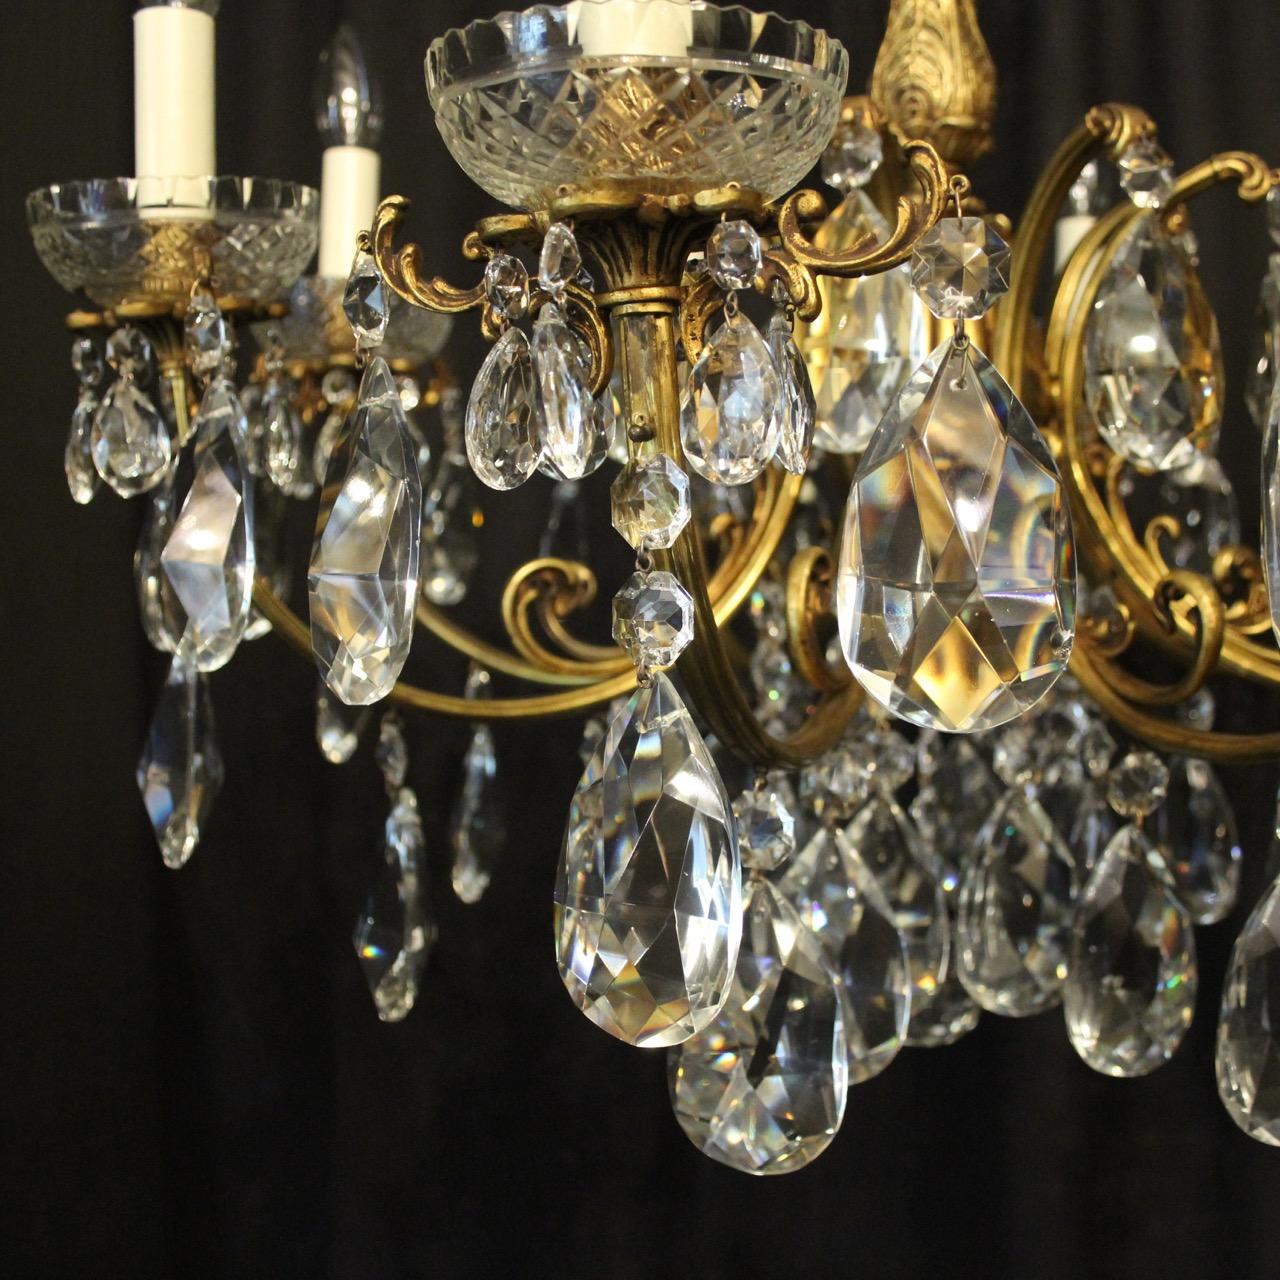 A quality Italian gilded bronze and crystal 8-light antique chandelier, the foliated leaf scrolling arms with glass bobeche drip pans and leaf candle sconces, issuing from an ornate central column with large acanthus leaf and glass baluster canopy,